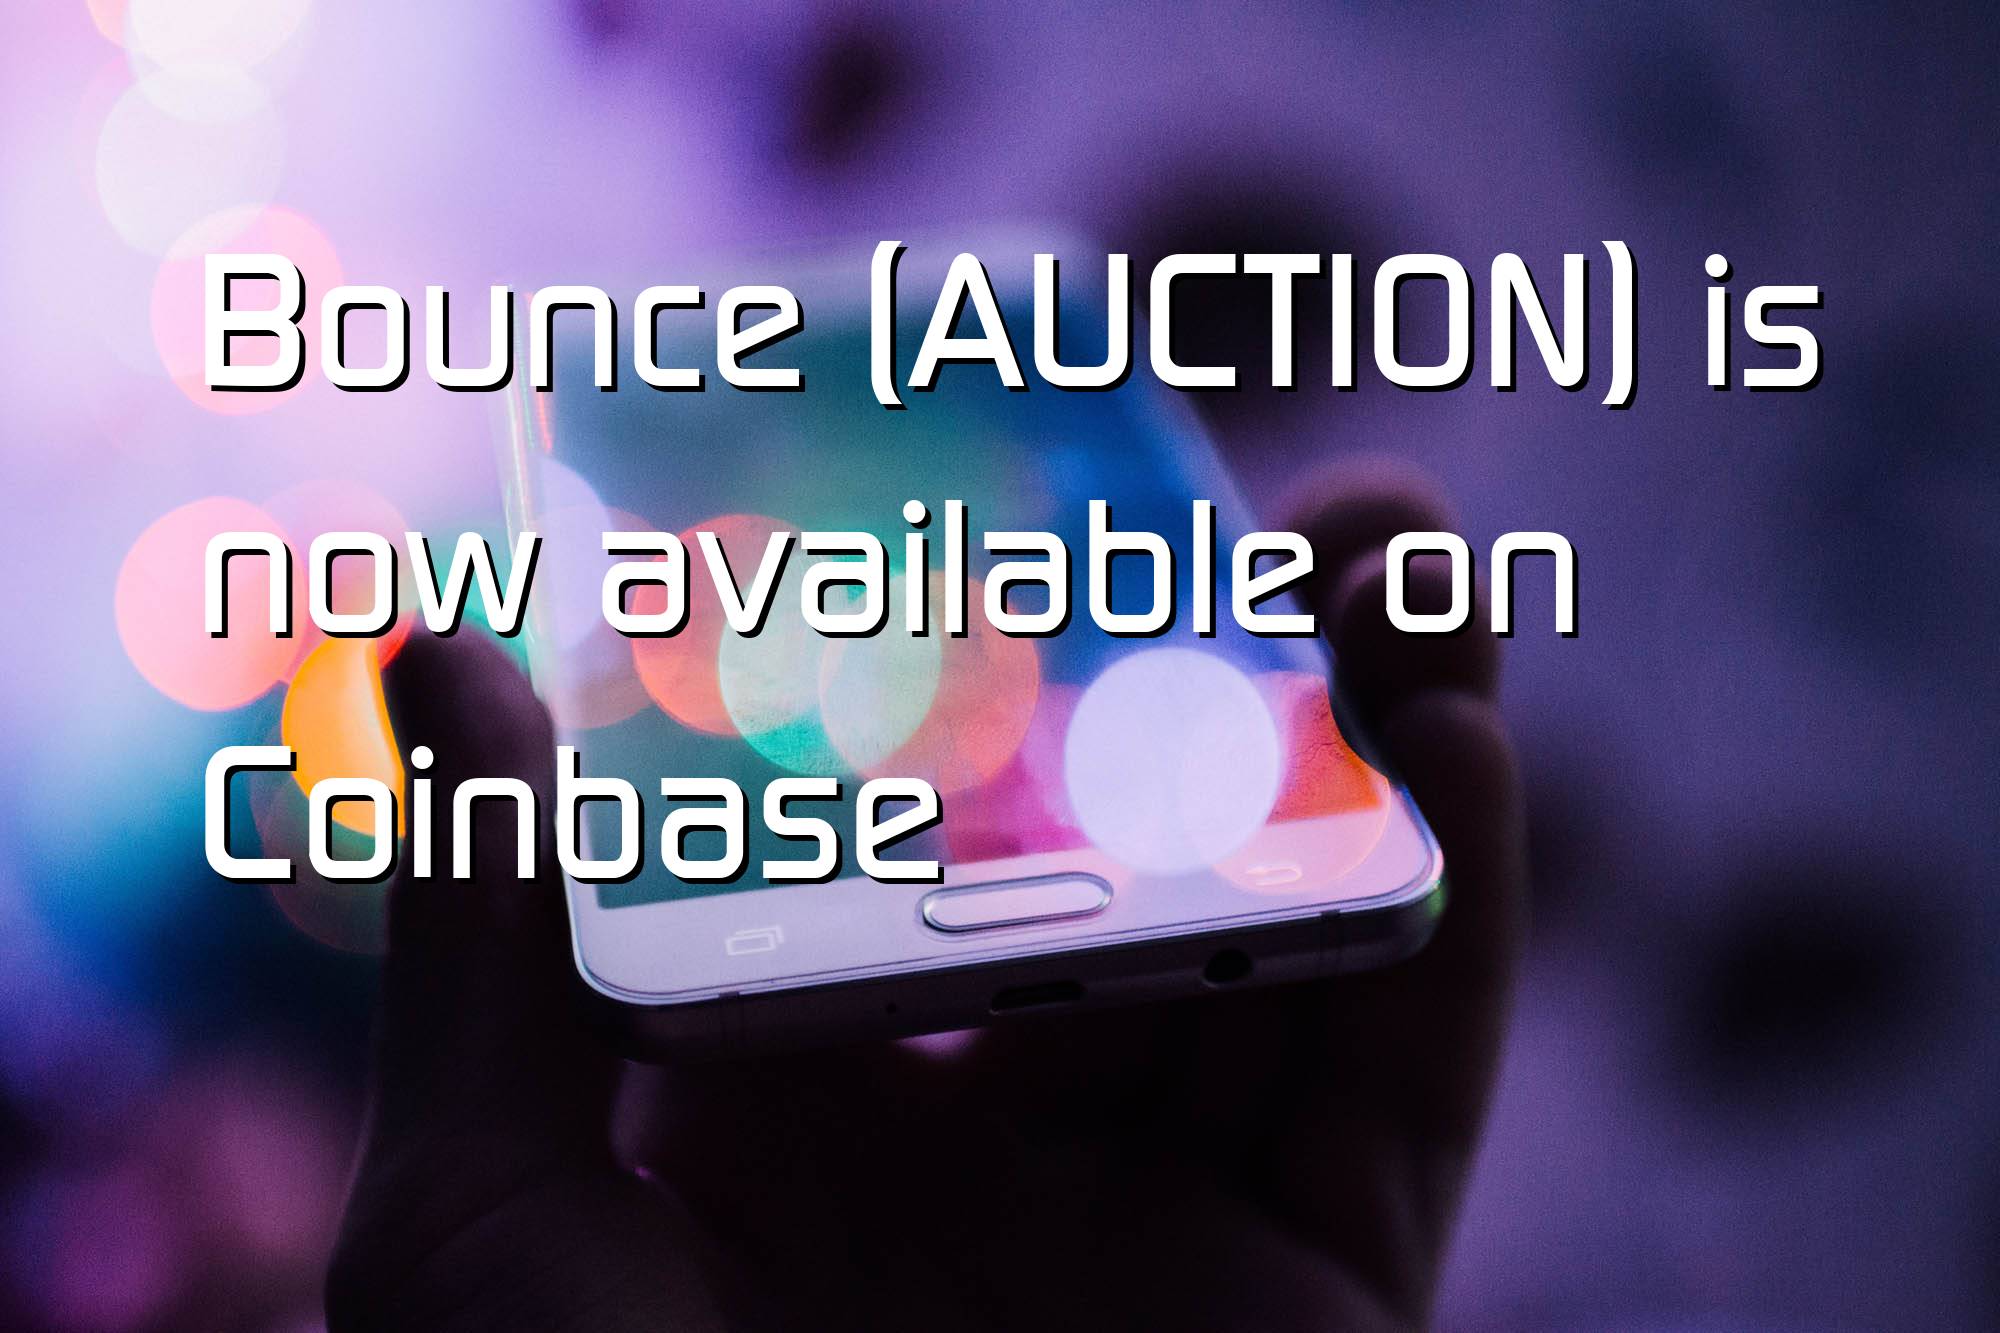 @$64935.03 Bounce (AUCTION) is now available on Coinbase